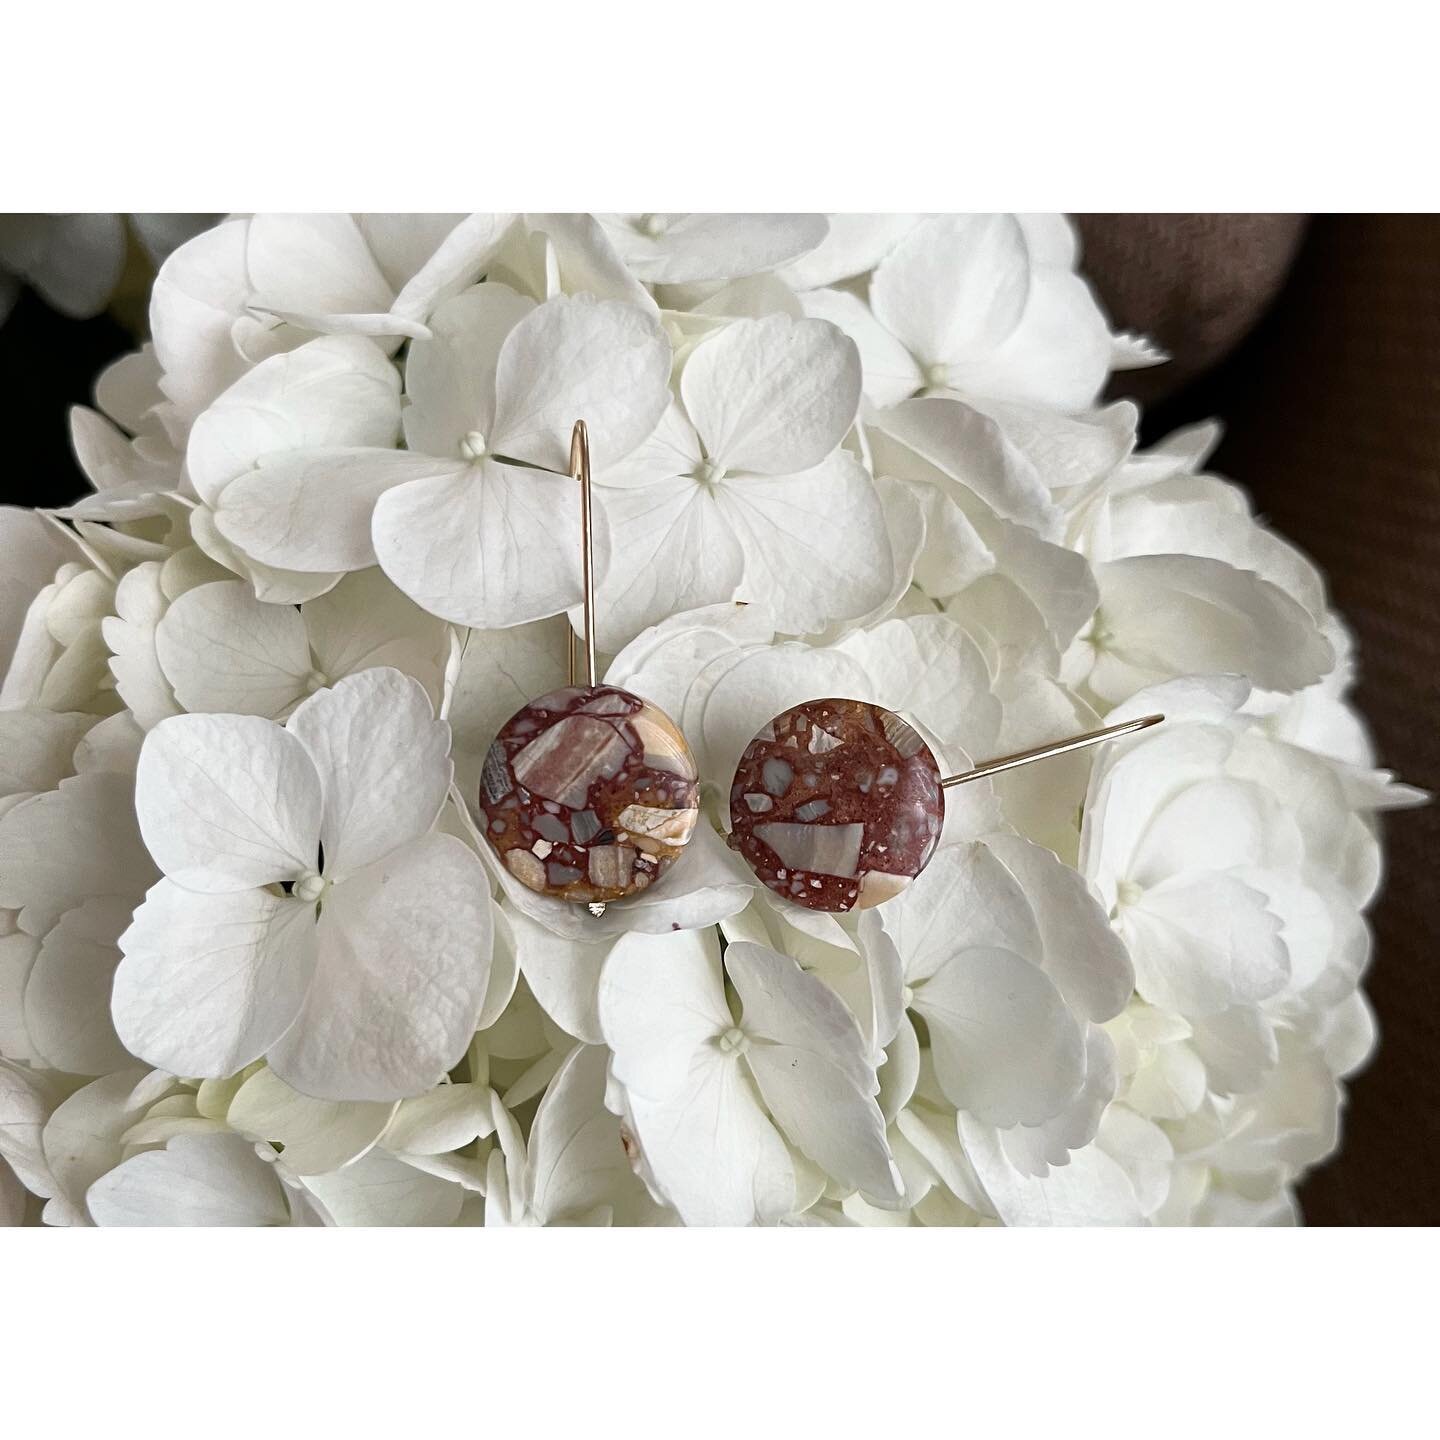 Never been so delighted to match a floor. #terrazolove 
Arc Earrings, Bressicated Jasper, 14k gold fill